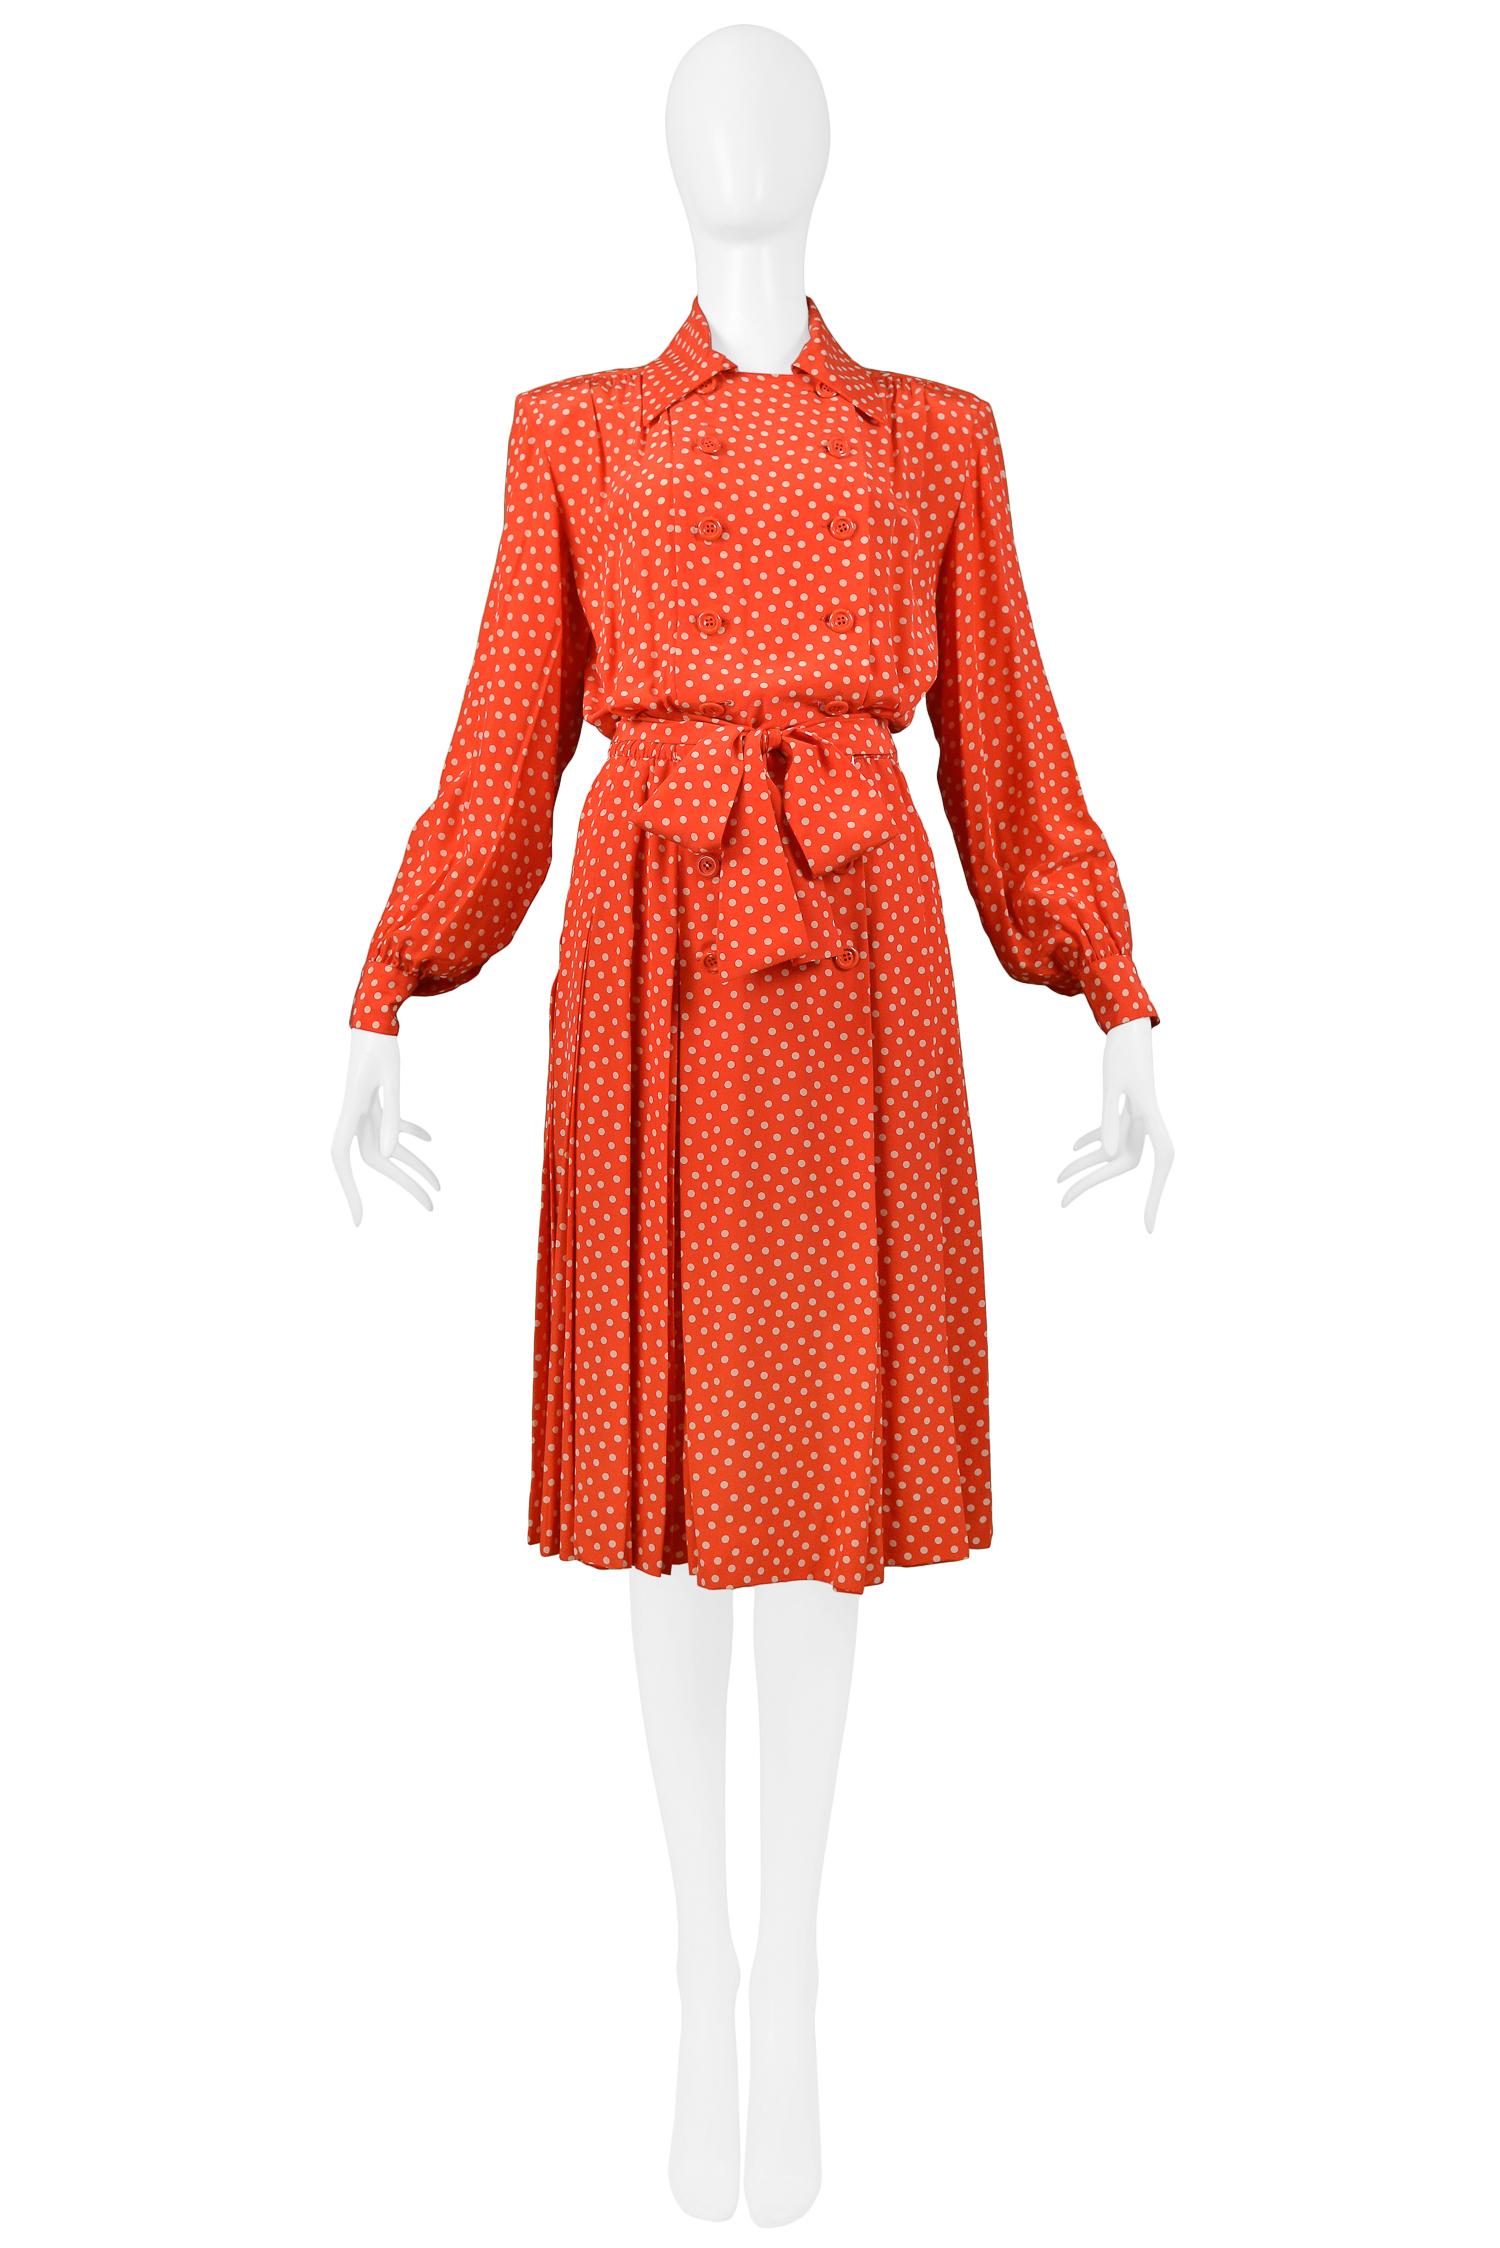 Resurrection Vintage is excited to offer a vintage red and white polka dot Yves Saint Laurent silk day dress with front pleats, double-breasted bodice, and belt.

Yves Saint Laurent
Size 40
Measurements: Bust 42”, Waist 28”, Hips 40”. Measurements: